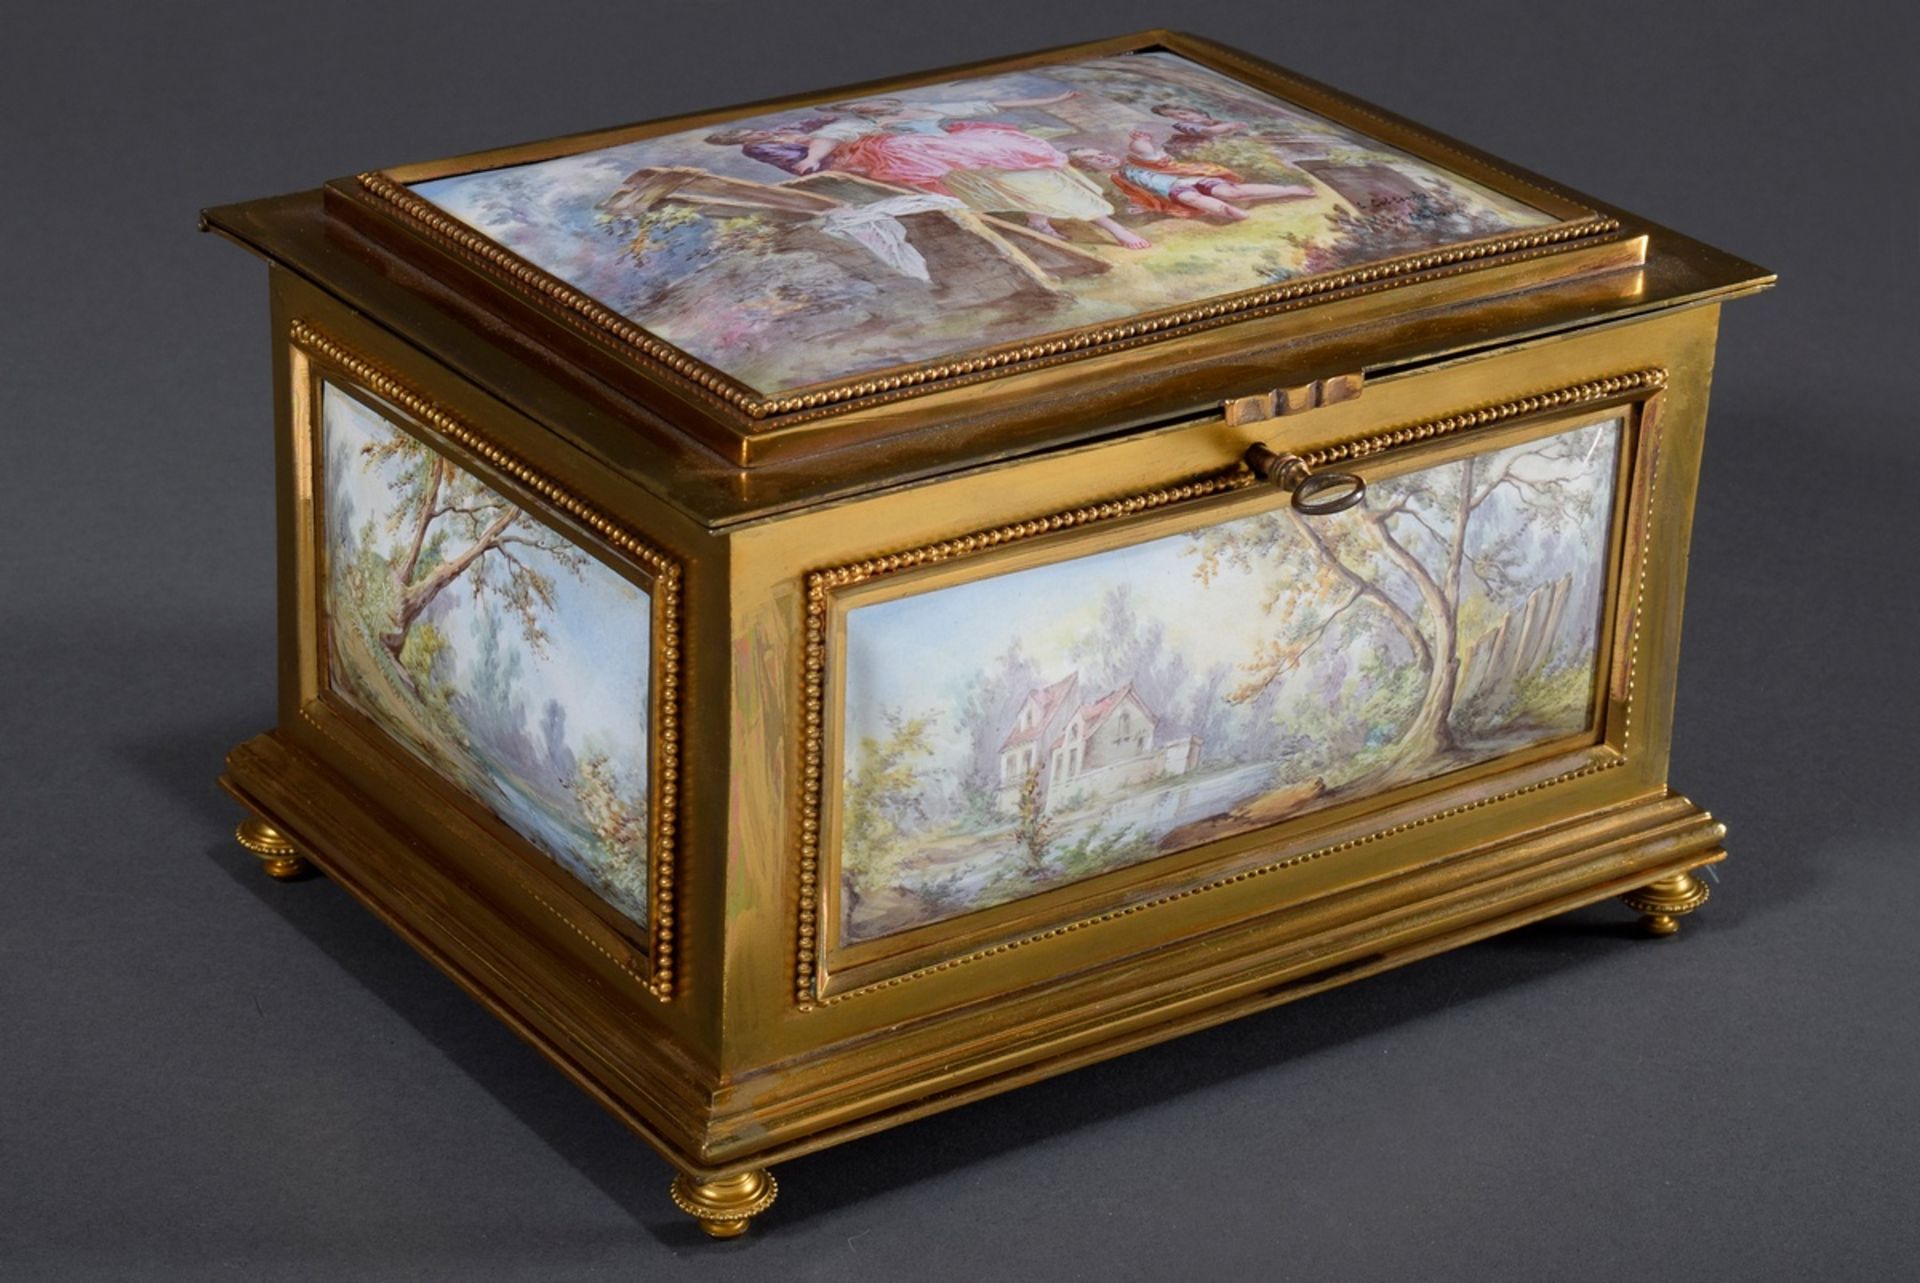 Große französische Emaille Schatulle mit 5 lupen | Large French enamel casket with 5 flawless pictu - Image 2 of 9